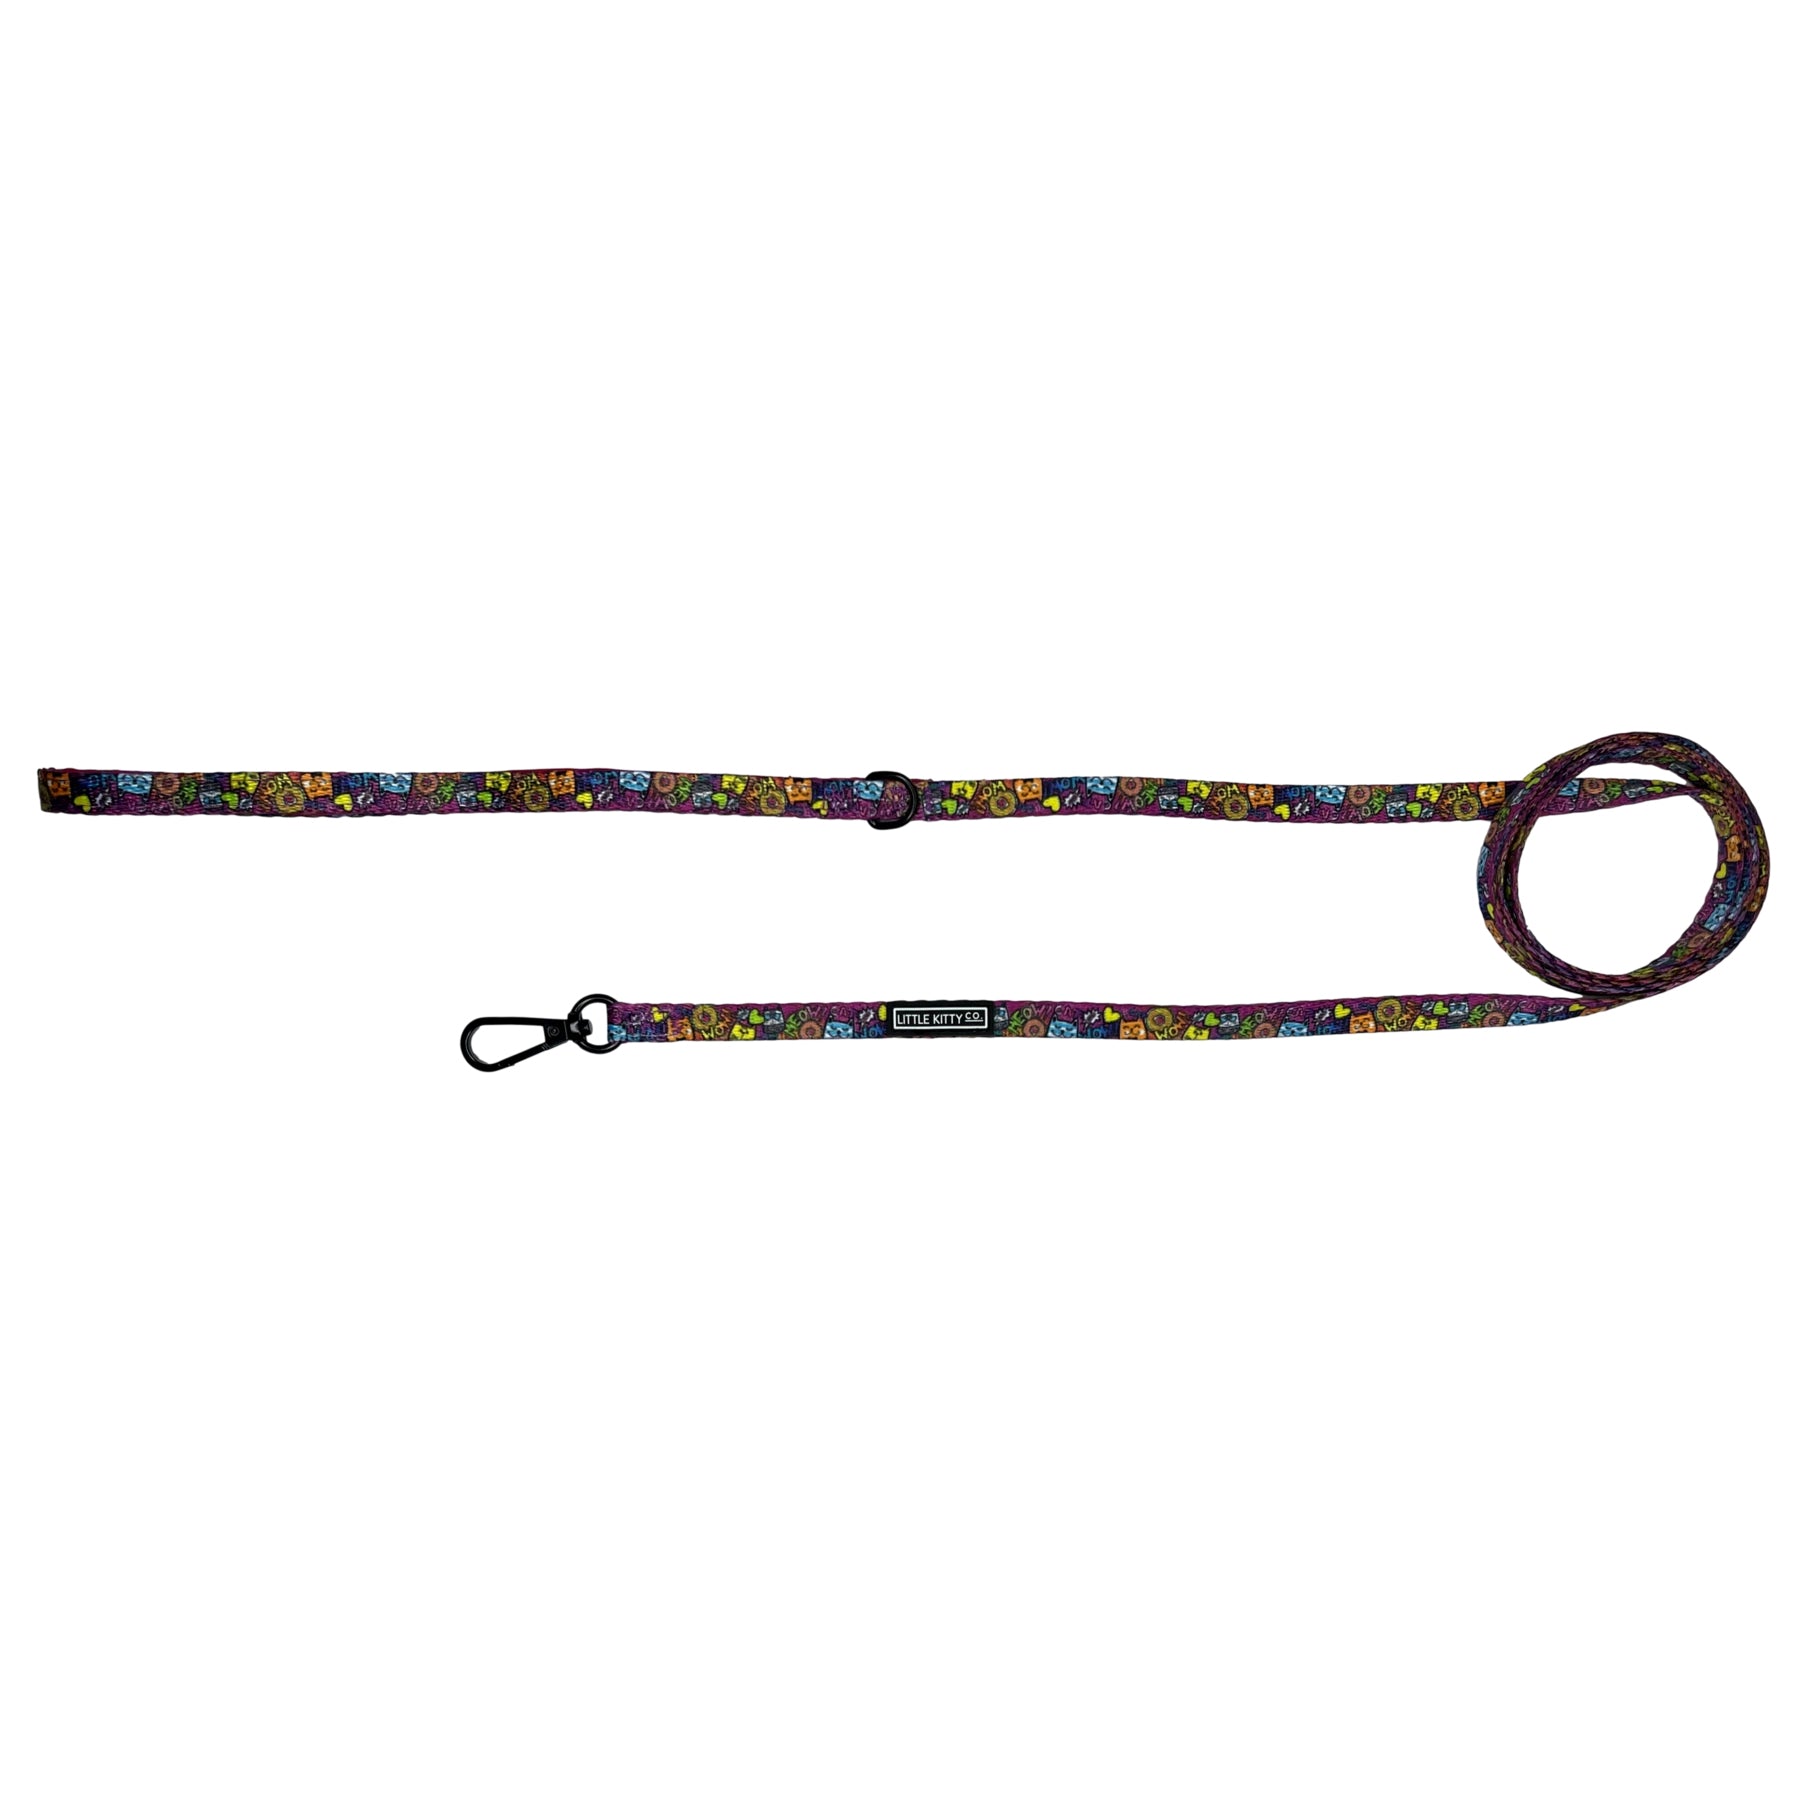 Little Kitty Co. Cat Step-In Harness - Graffiti (Limited Edition) - A vibrant multi-coloured pop art themed cat leash.